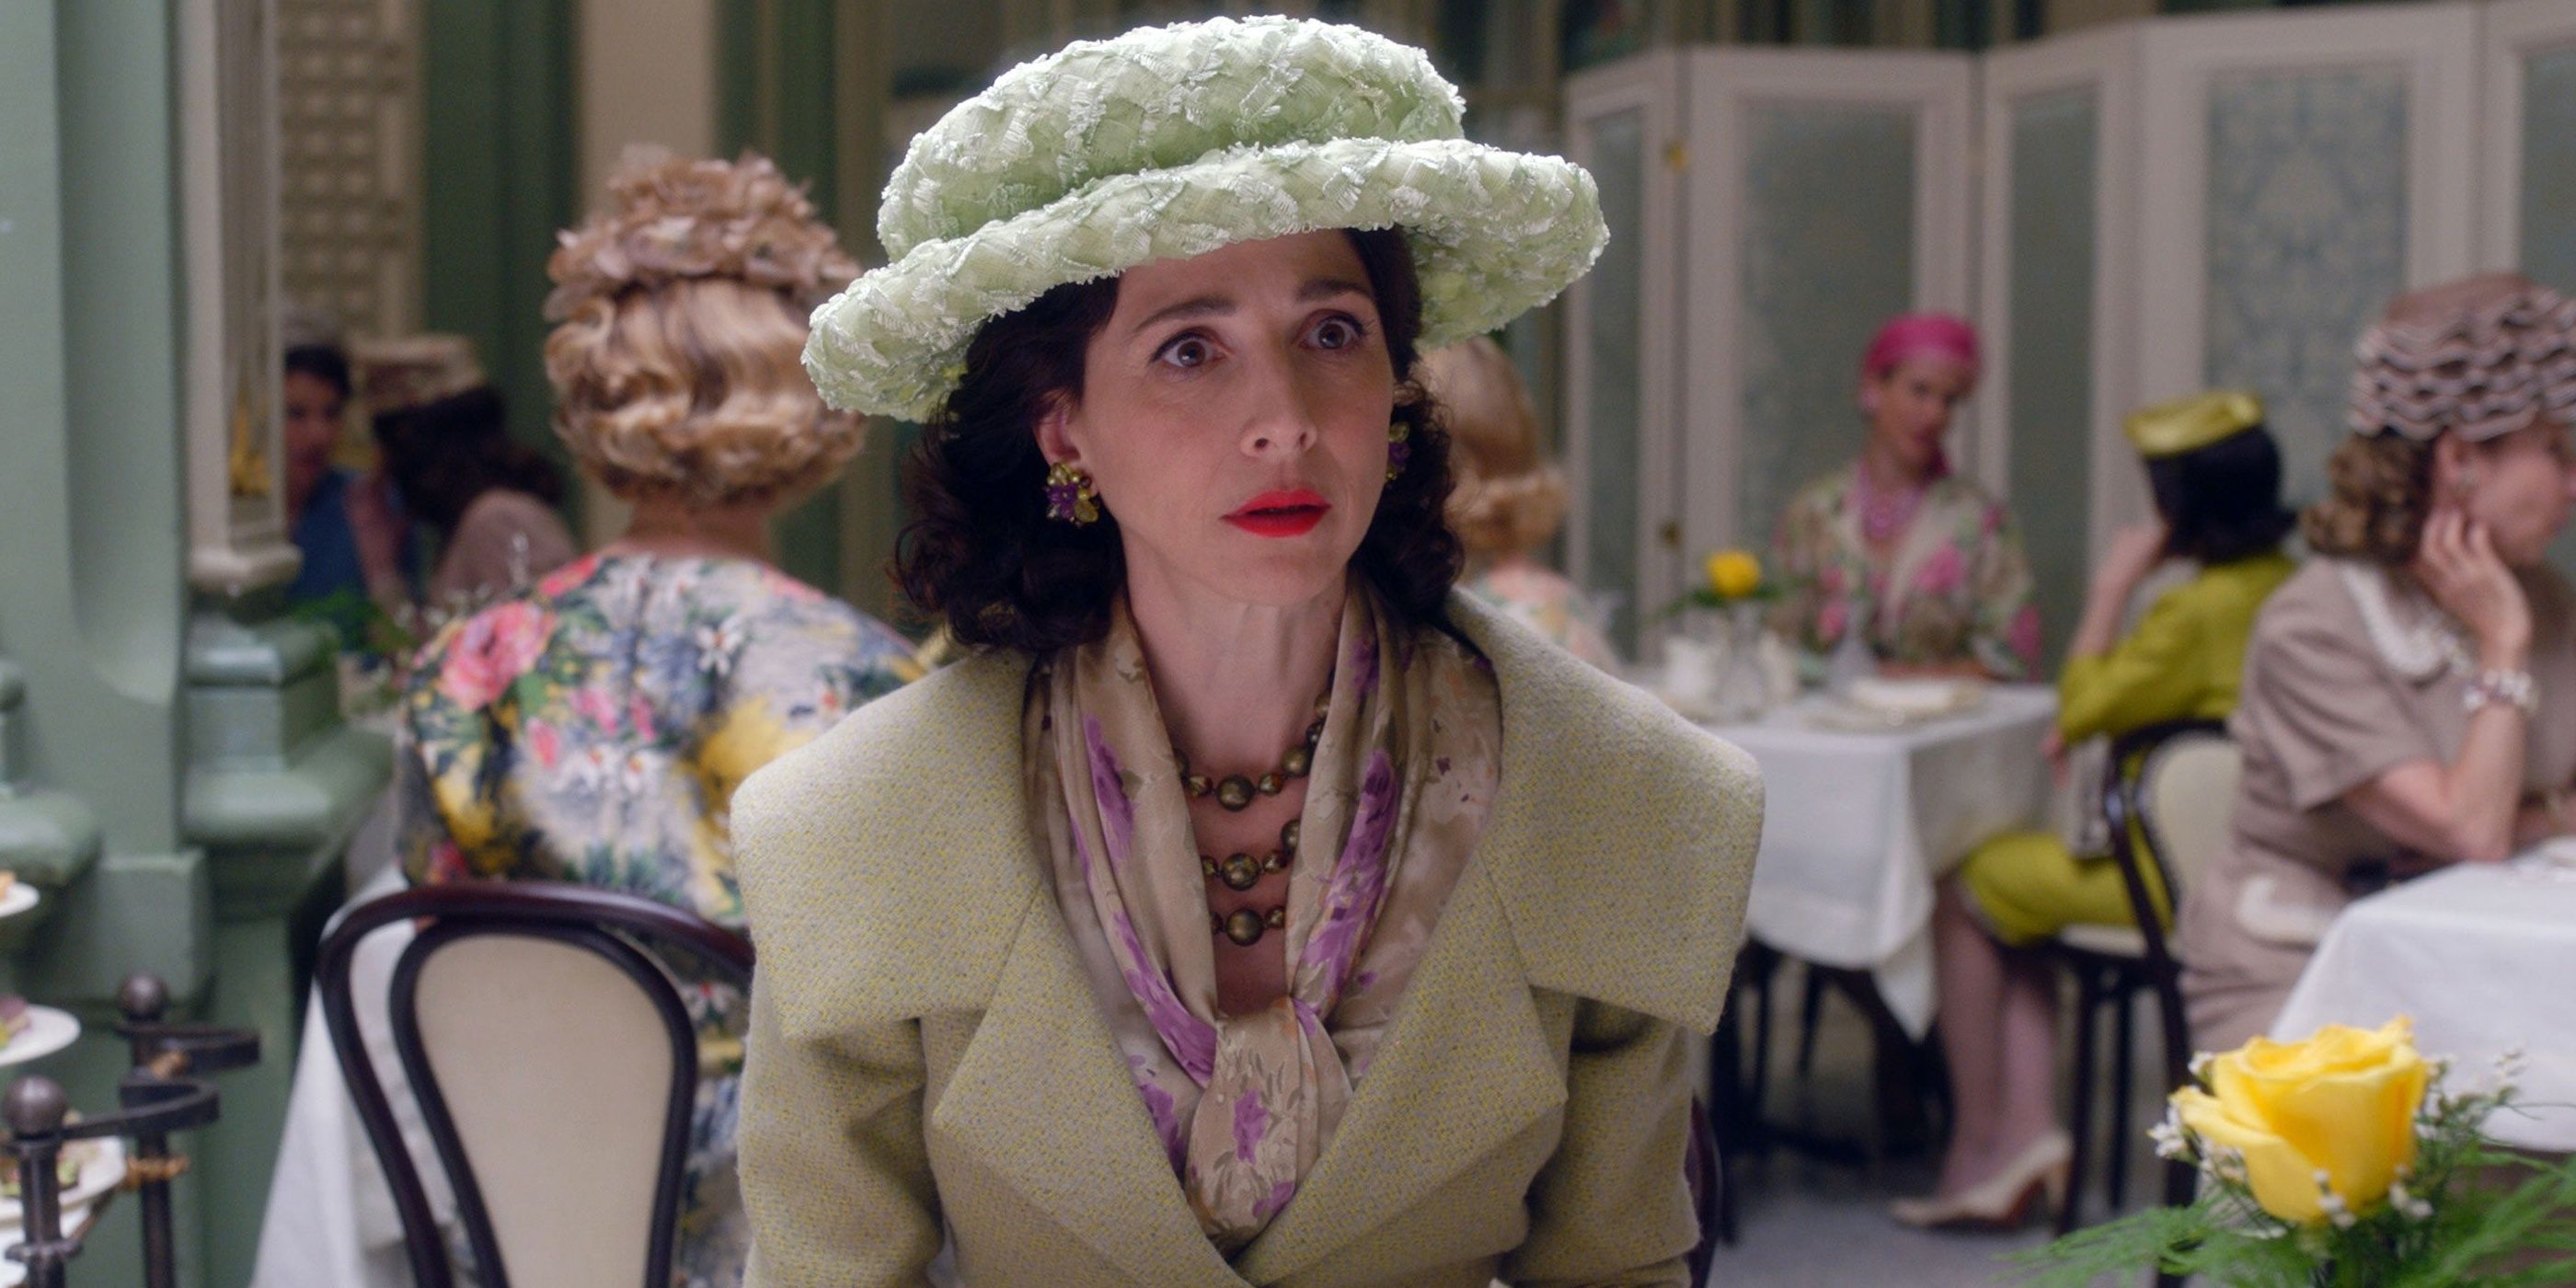 Rose at a restaurant in The Marvelous Mrs. Maisel